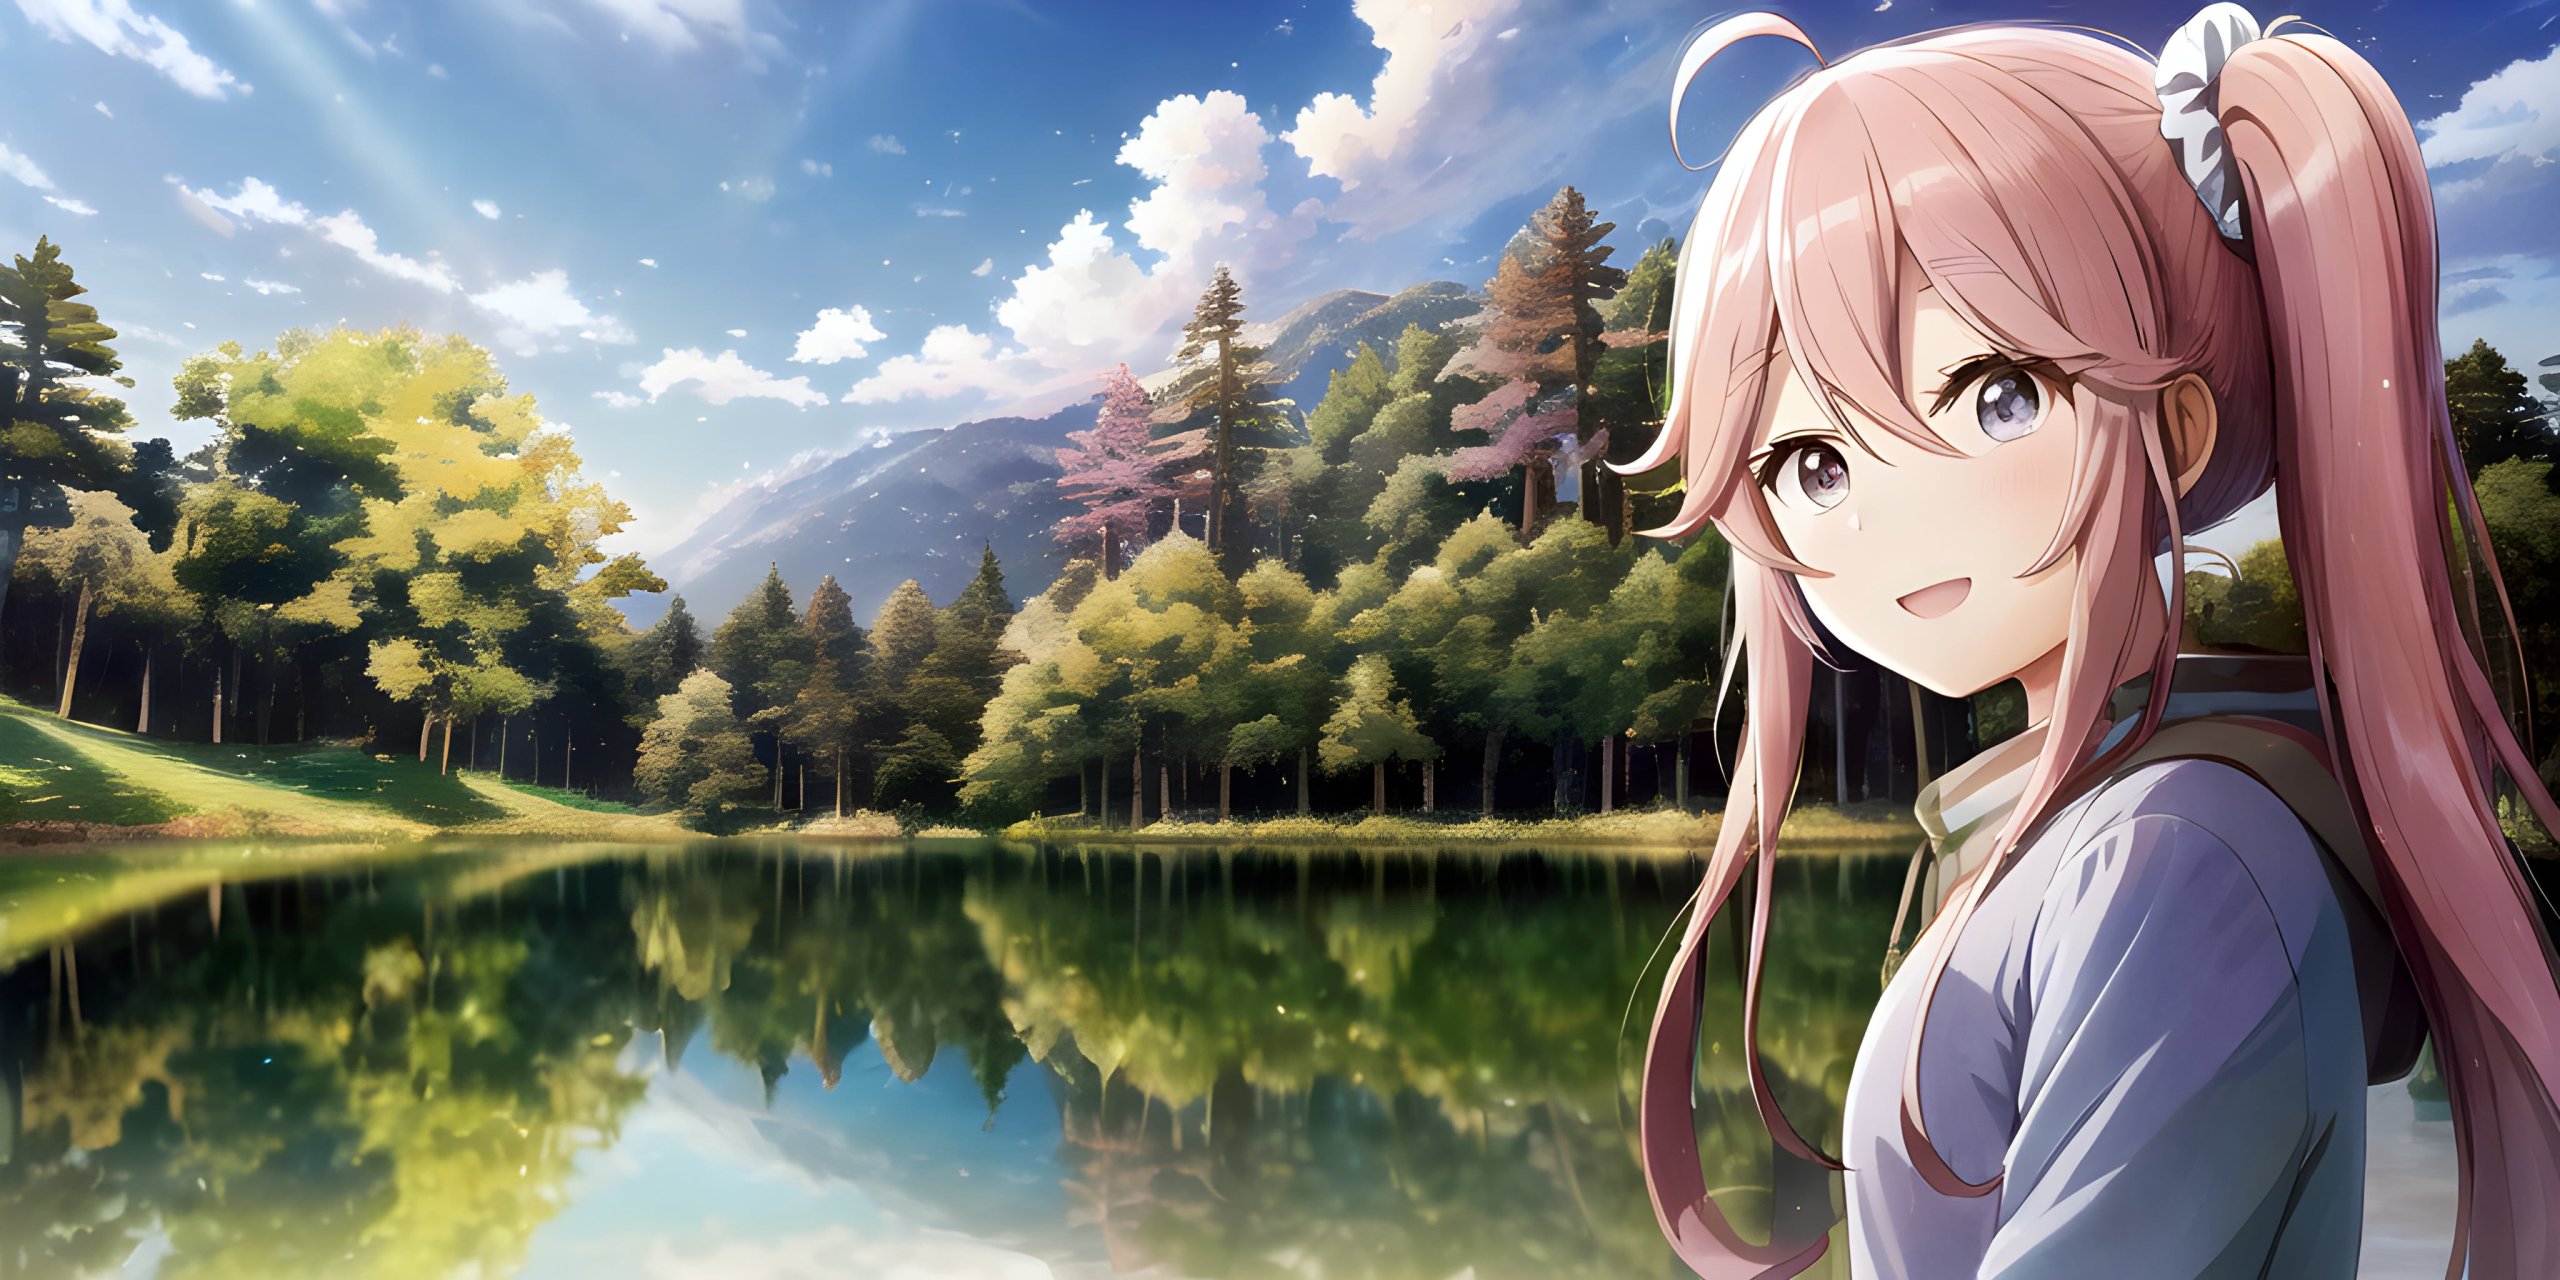 A young anime girl explores the outdoors and spends time at a beautiful lake in the forest. 🌲🌳